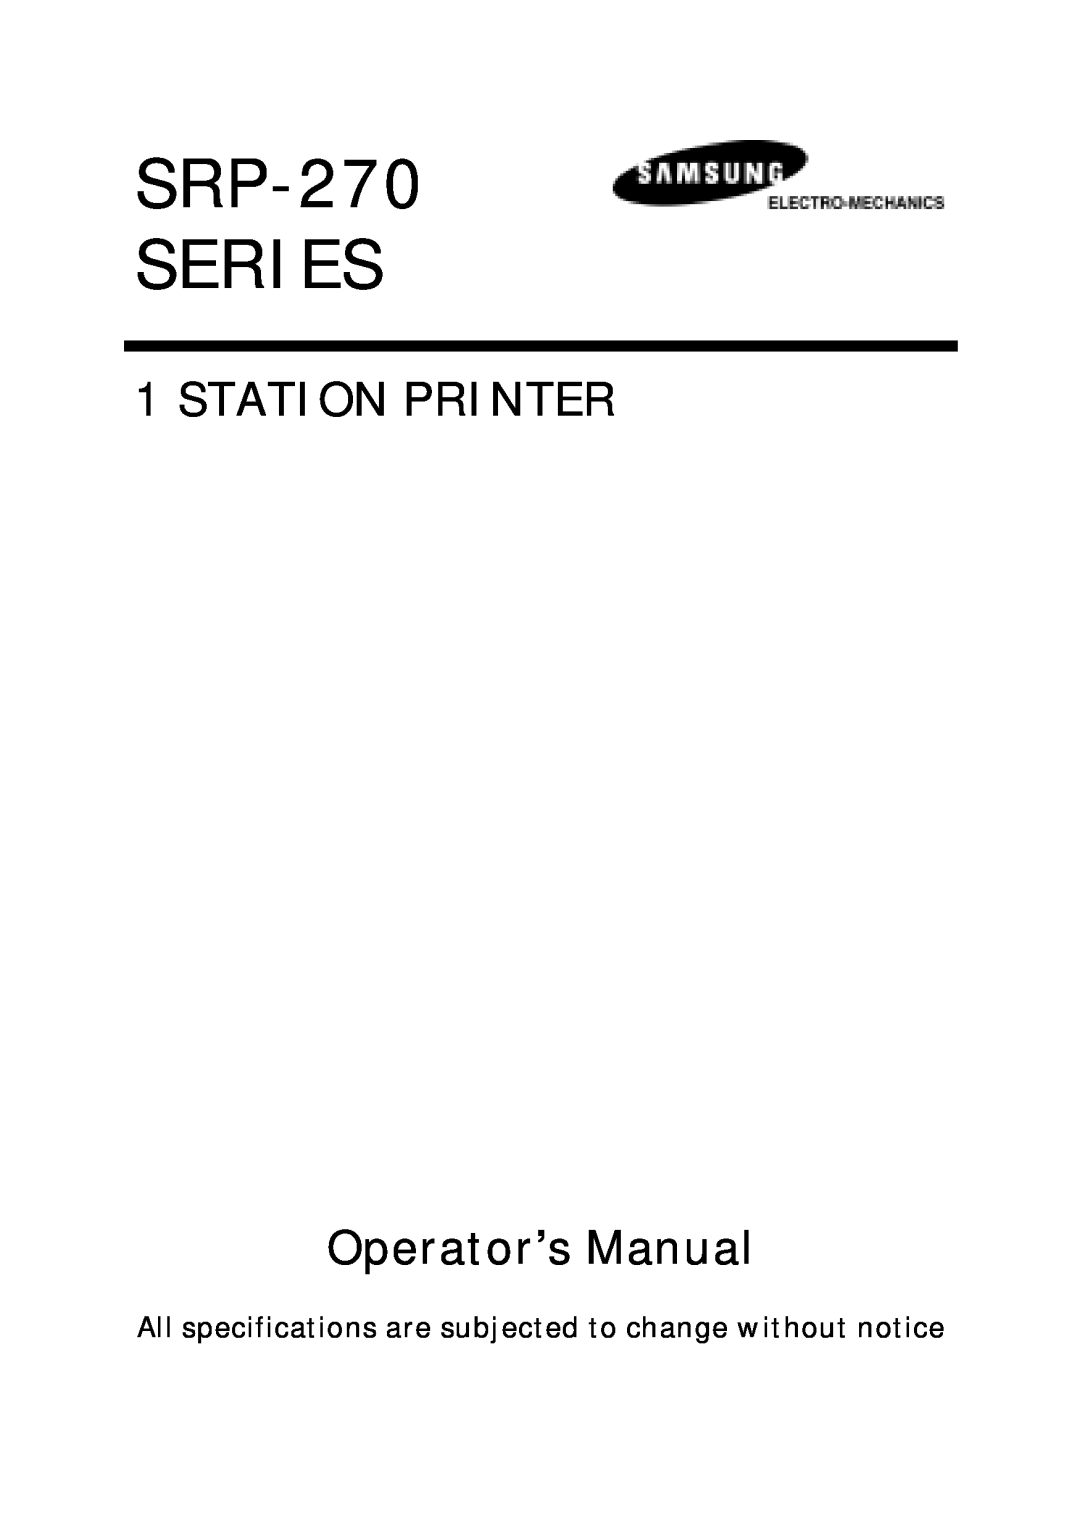 Sanyo specifications SRP-270 SERIES, STATION PRINTER Operator’s Manual 